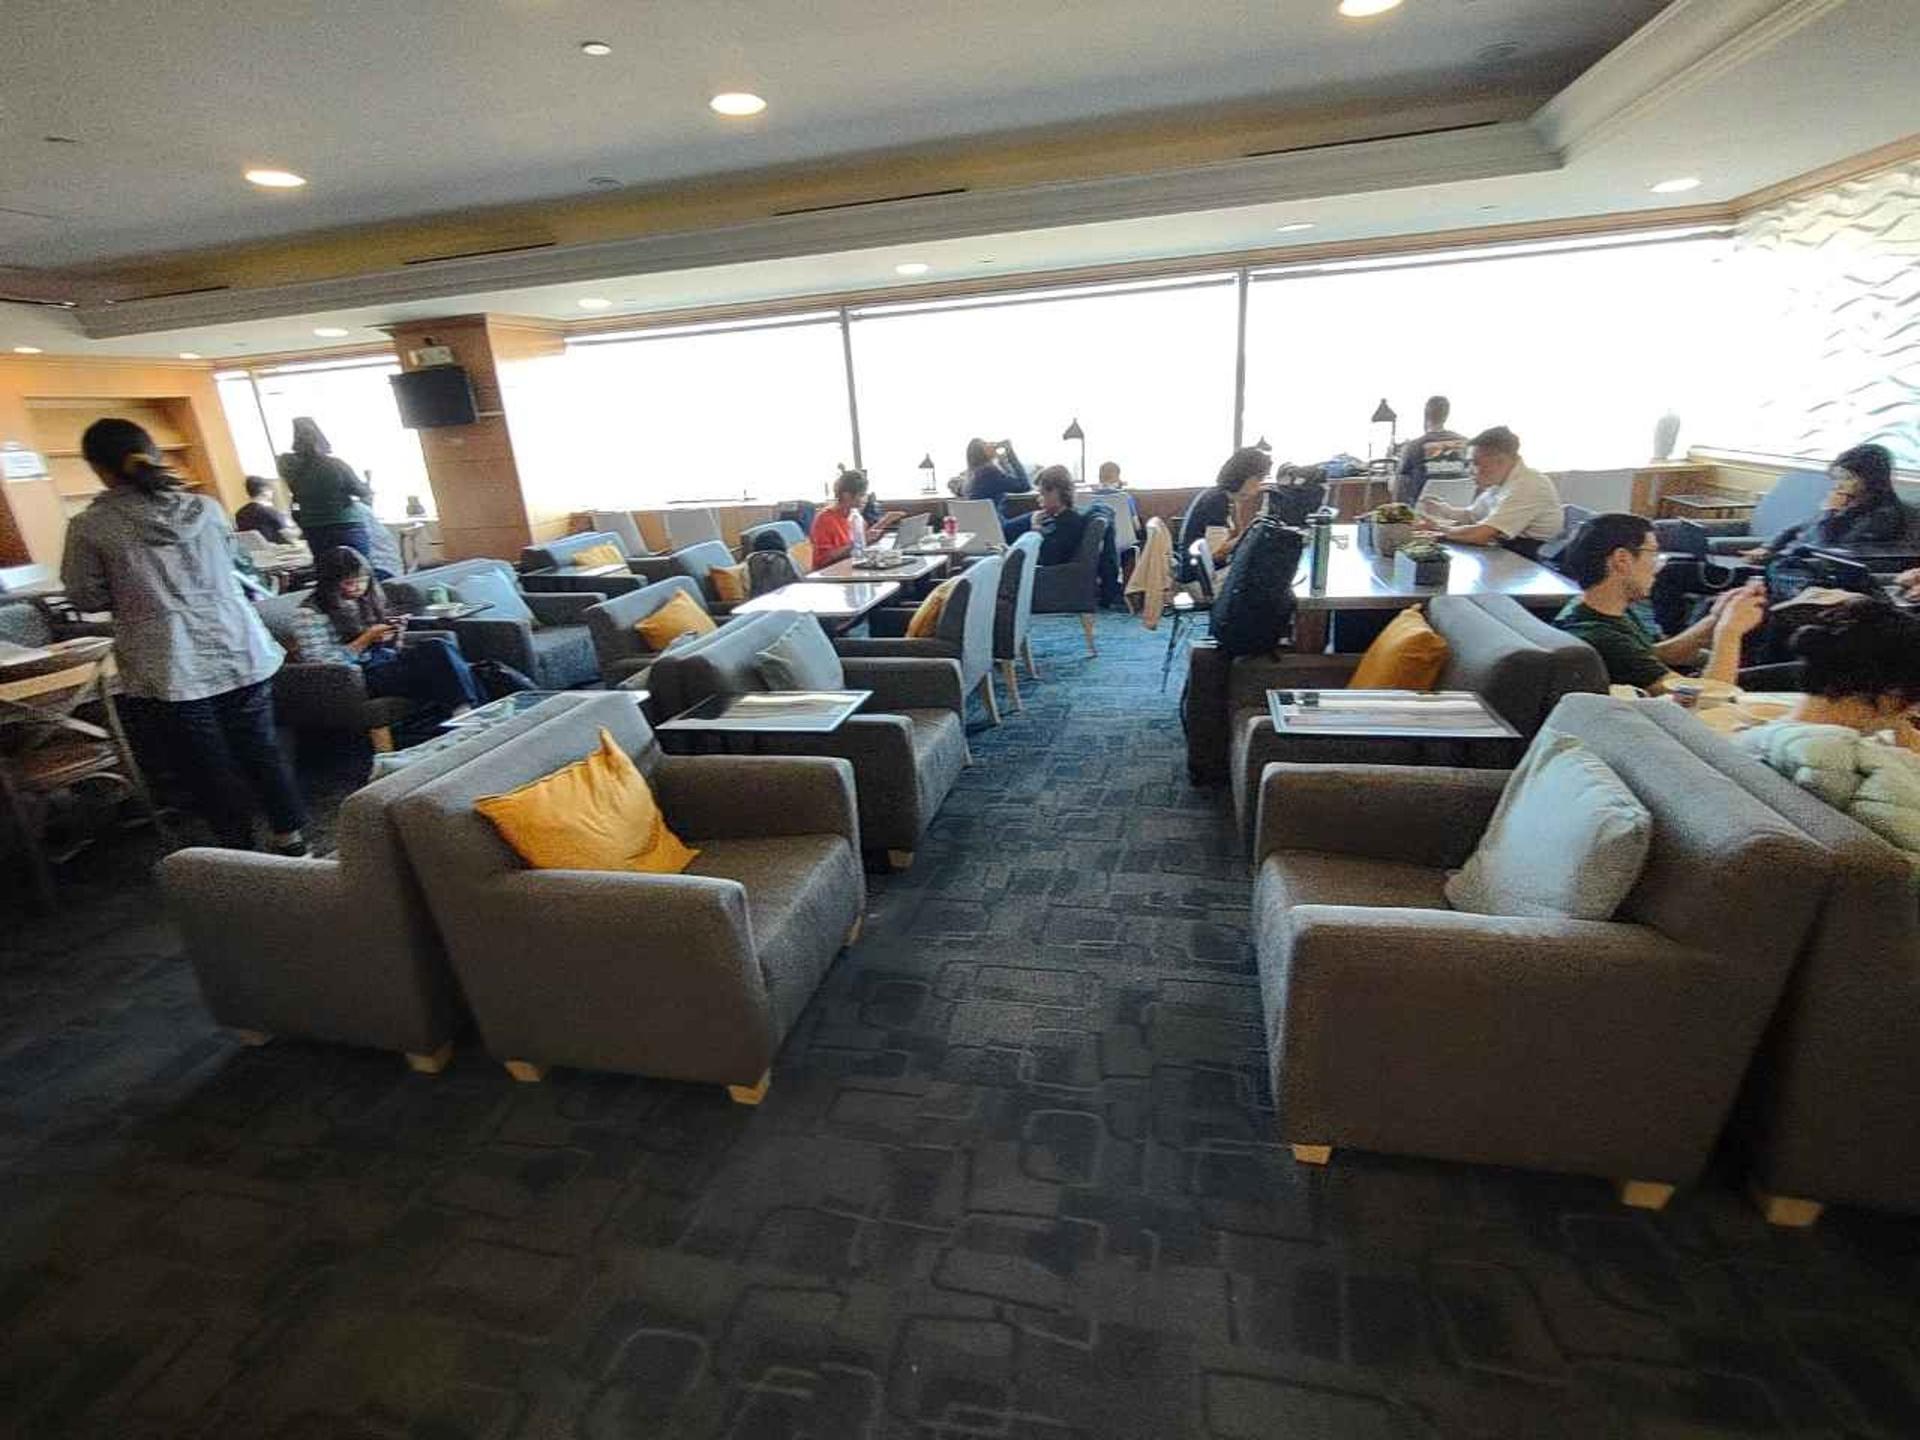 China Airlines Dynasty Lounge image 11 of 34